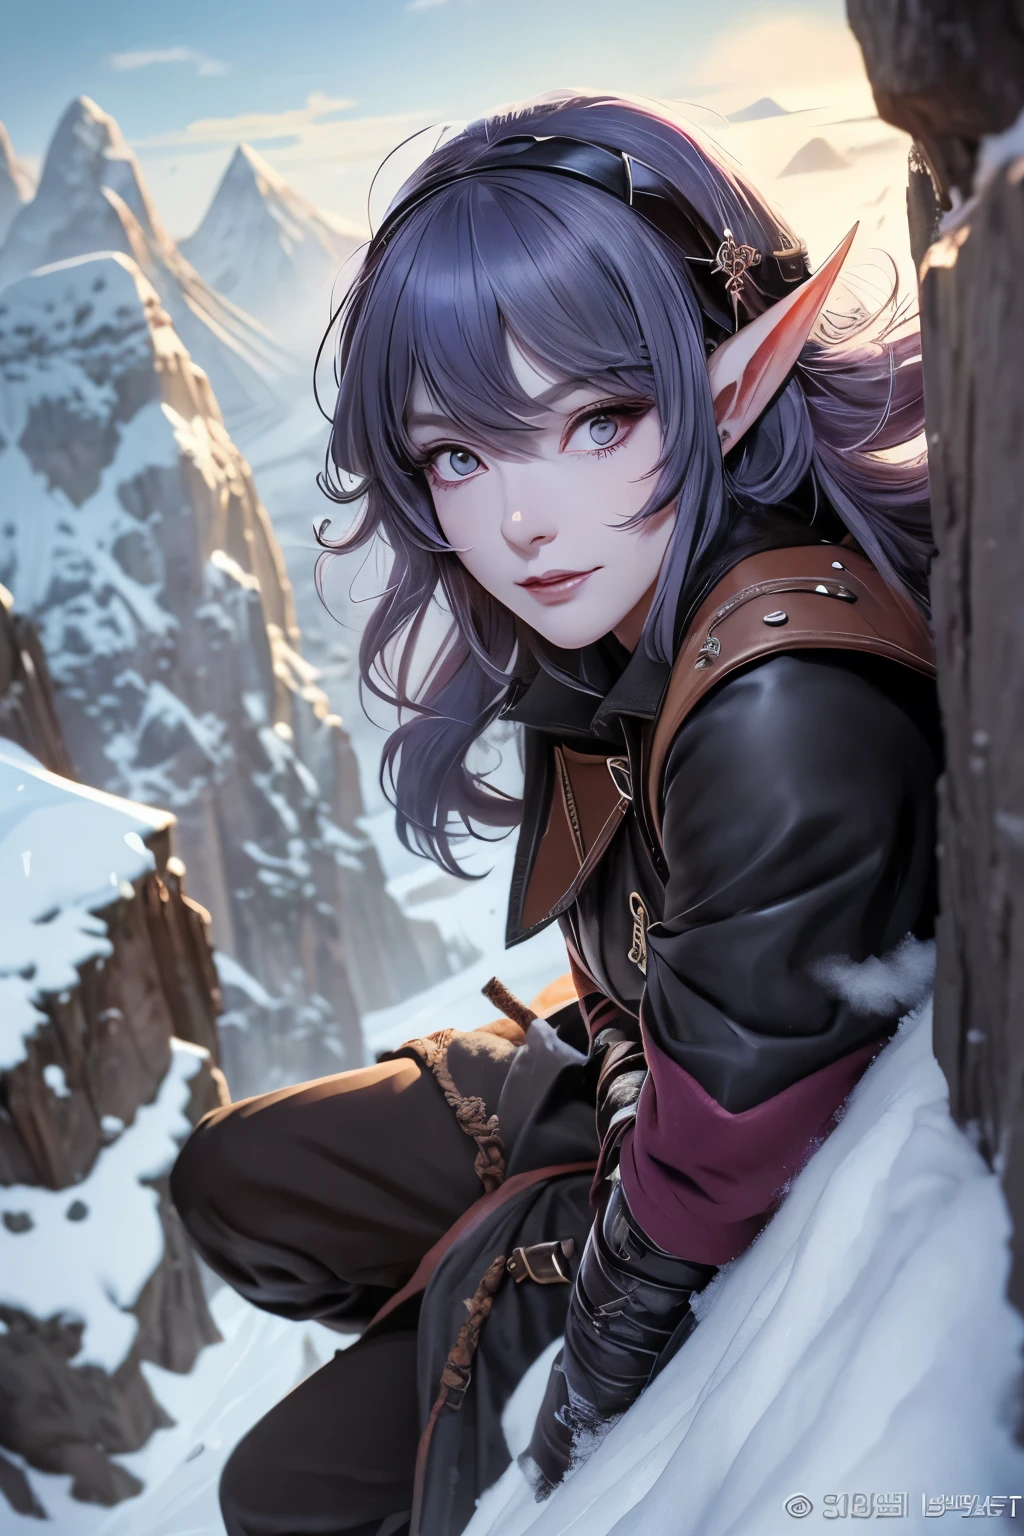 (Ultra-detailed face, sleepy eyes), (Fantasy Illustration with Gothic & Ukiyo-e & Comic Art), (Full body, A middle-aged dark elf woman with silver hair, blunt bangs, very long disheveled hair, and dark purple skin, lavender eyes), (She is wearing a well-worn black trench coat and leather climbing boots. The trench coat is double-breasted, belted, with chin warmers, gun patch, epaulettes, and a cape-like covering on the back), (She has a grim face, breathes heavily, and uses a rope to climb a steep blizzard-blowing snowy mountain cliff), BREAK (Below her we see snow-covered mountains, strong winds, and falling snow)